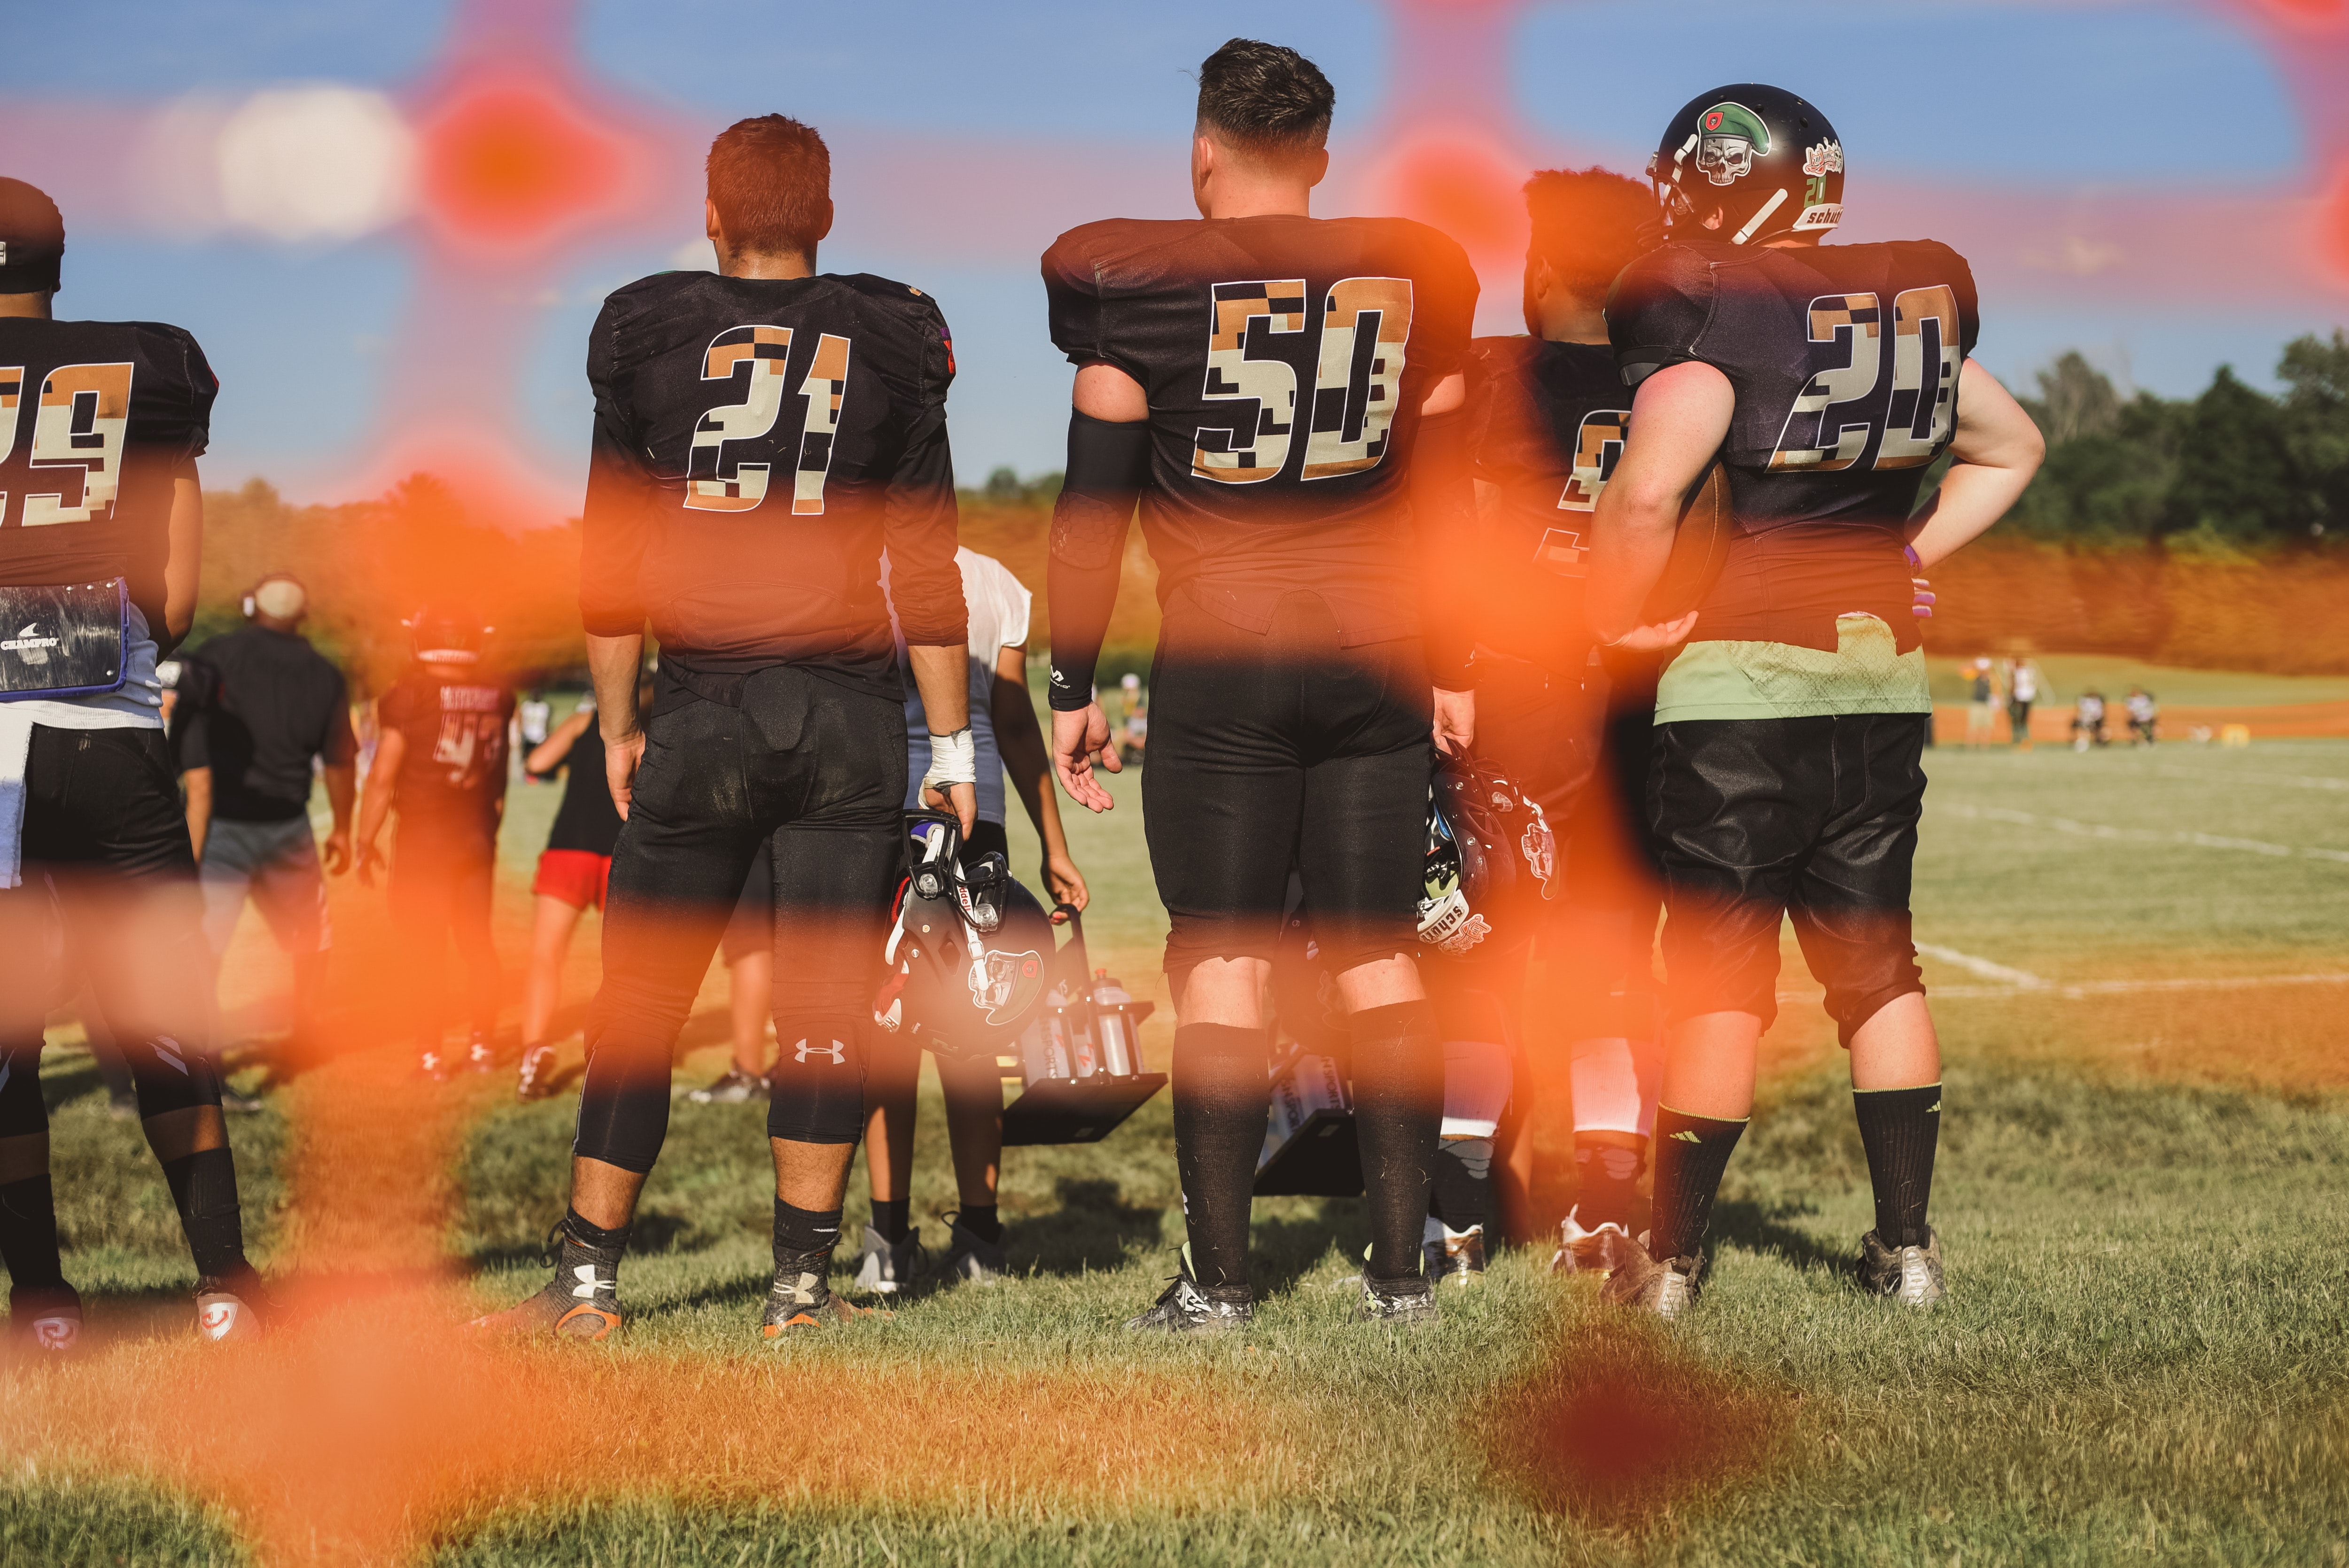 selective-focus-photography-of-football-team-on-field-2253881